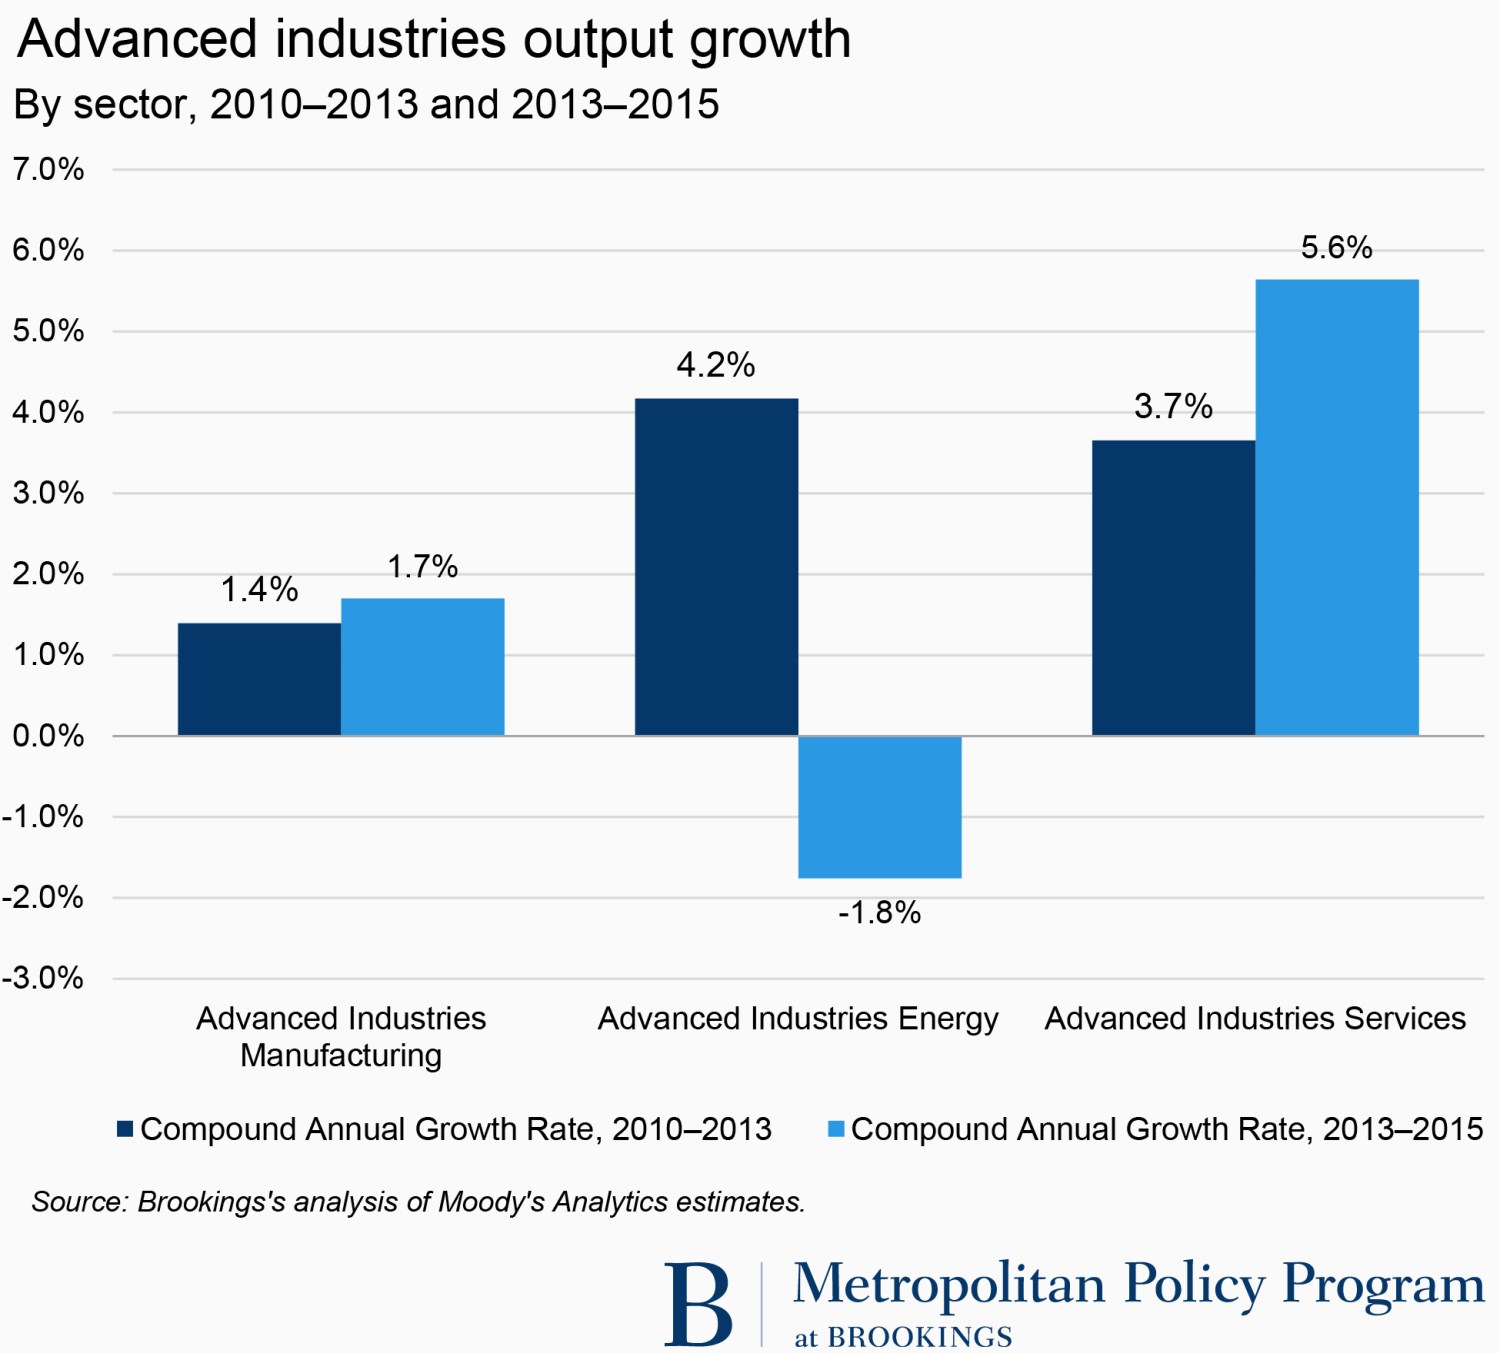 Advanced industries output and employment growth